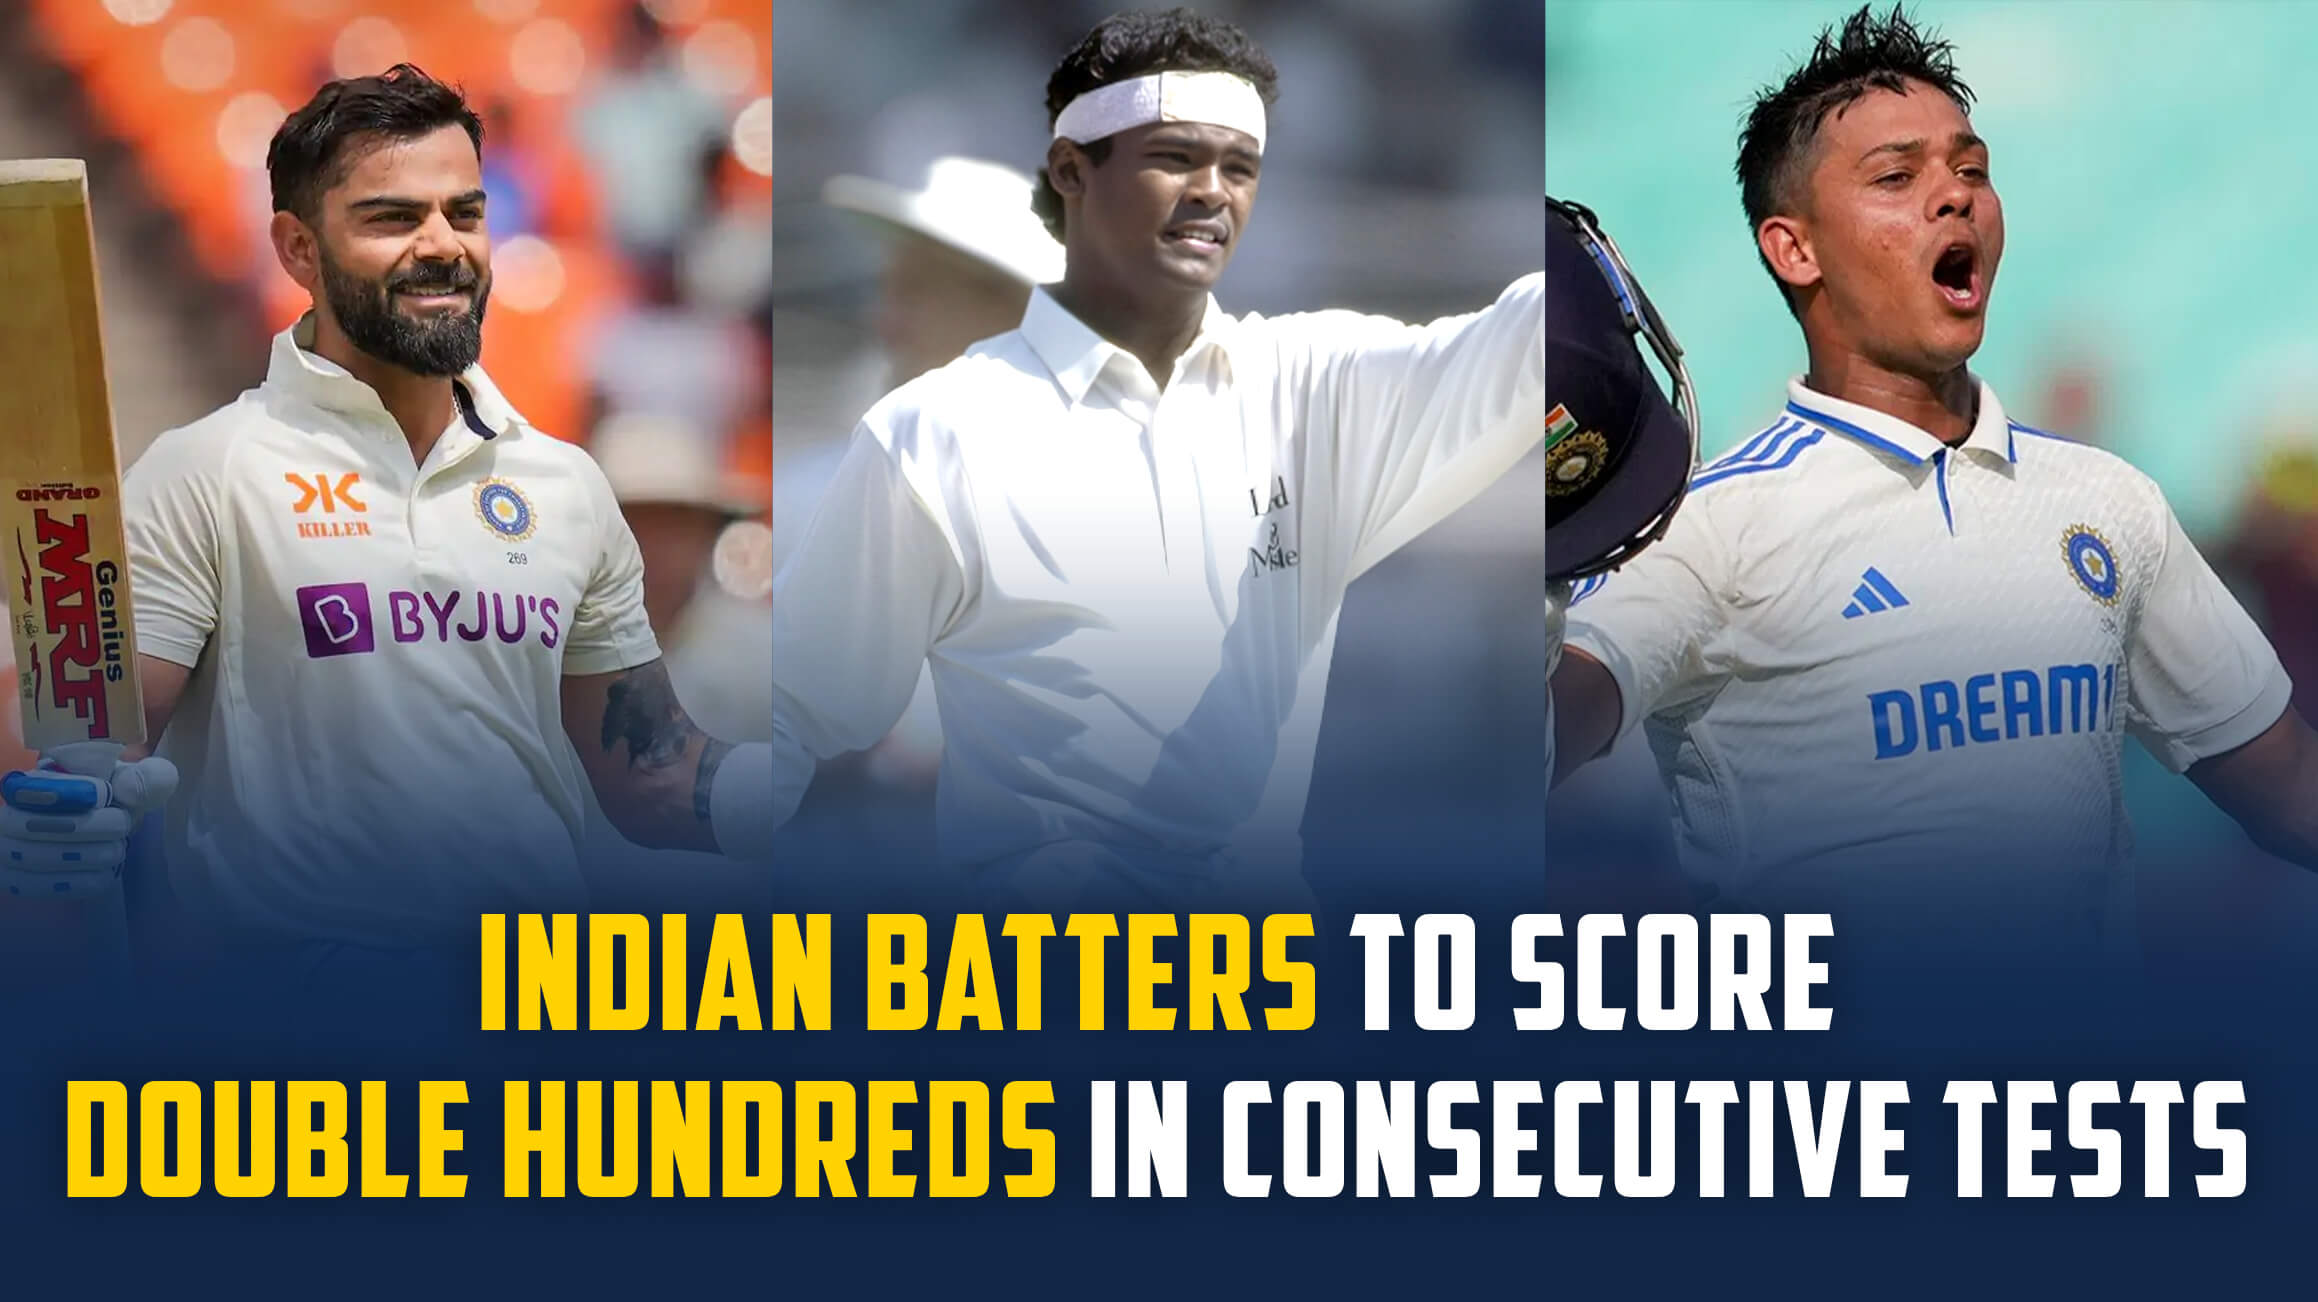 Indian batters to score double hundreds in consecutive Tests